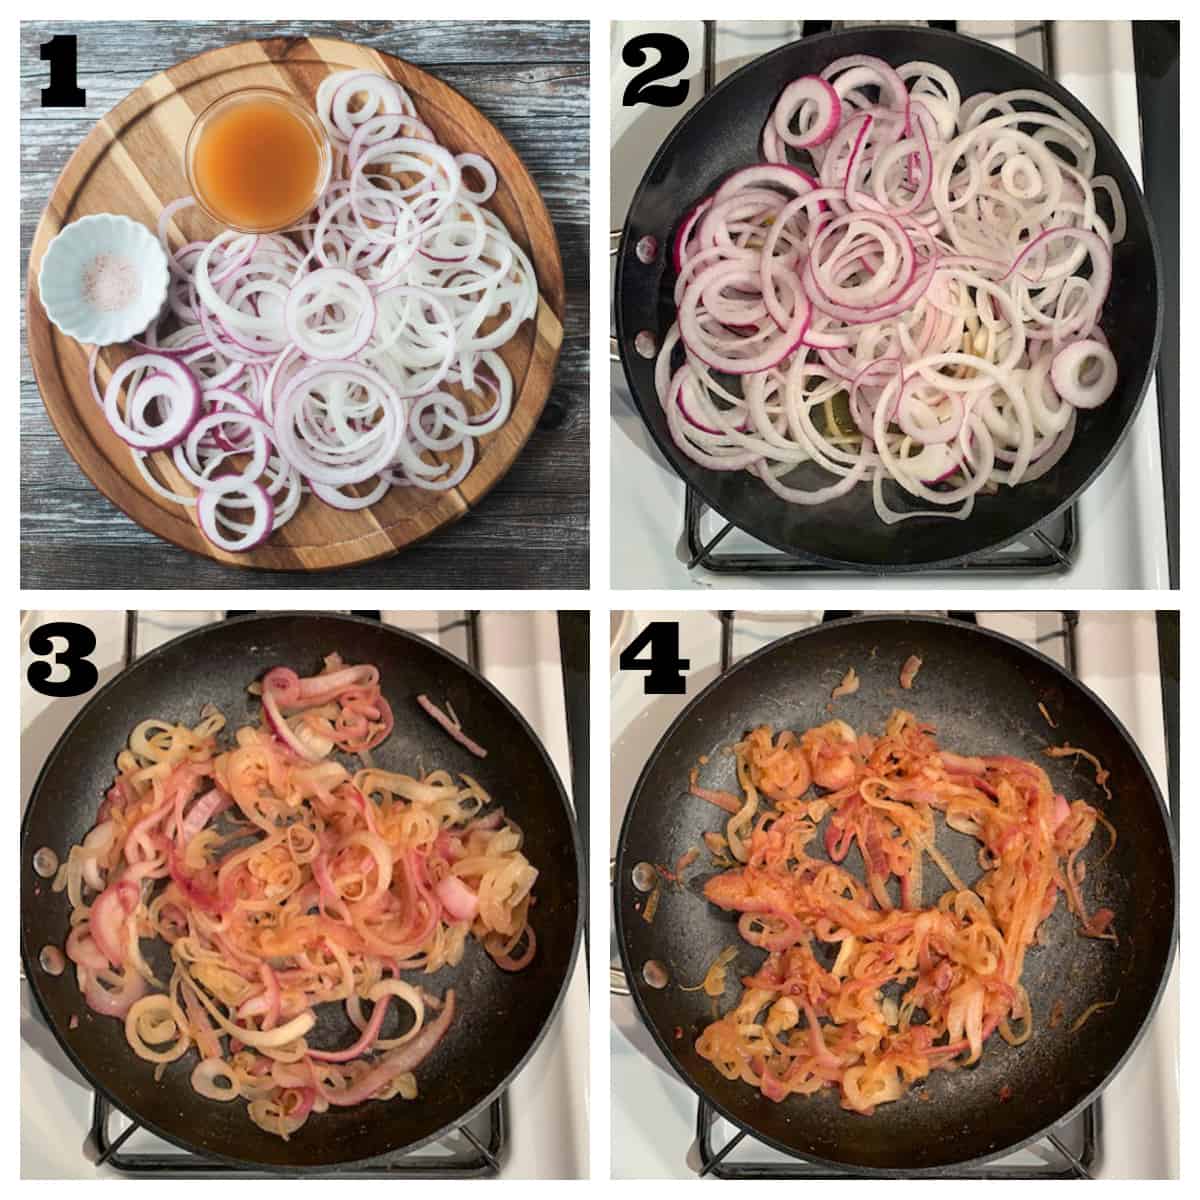 Collage of 4 photos showing raw sliced onions and how to caramelize them.